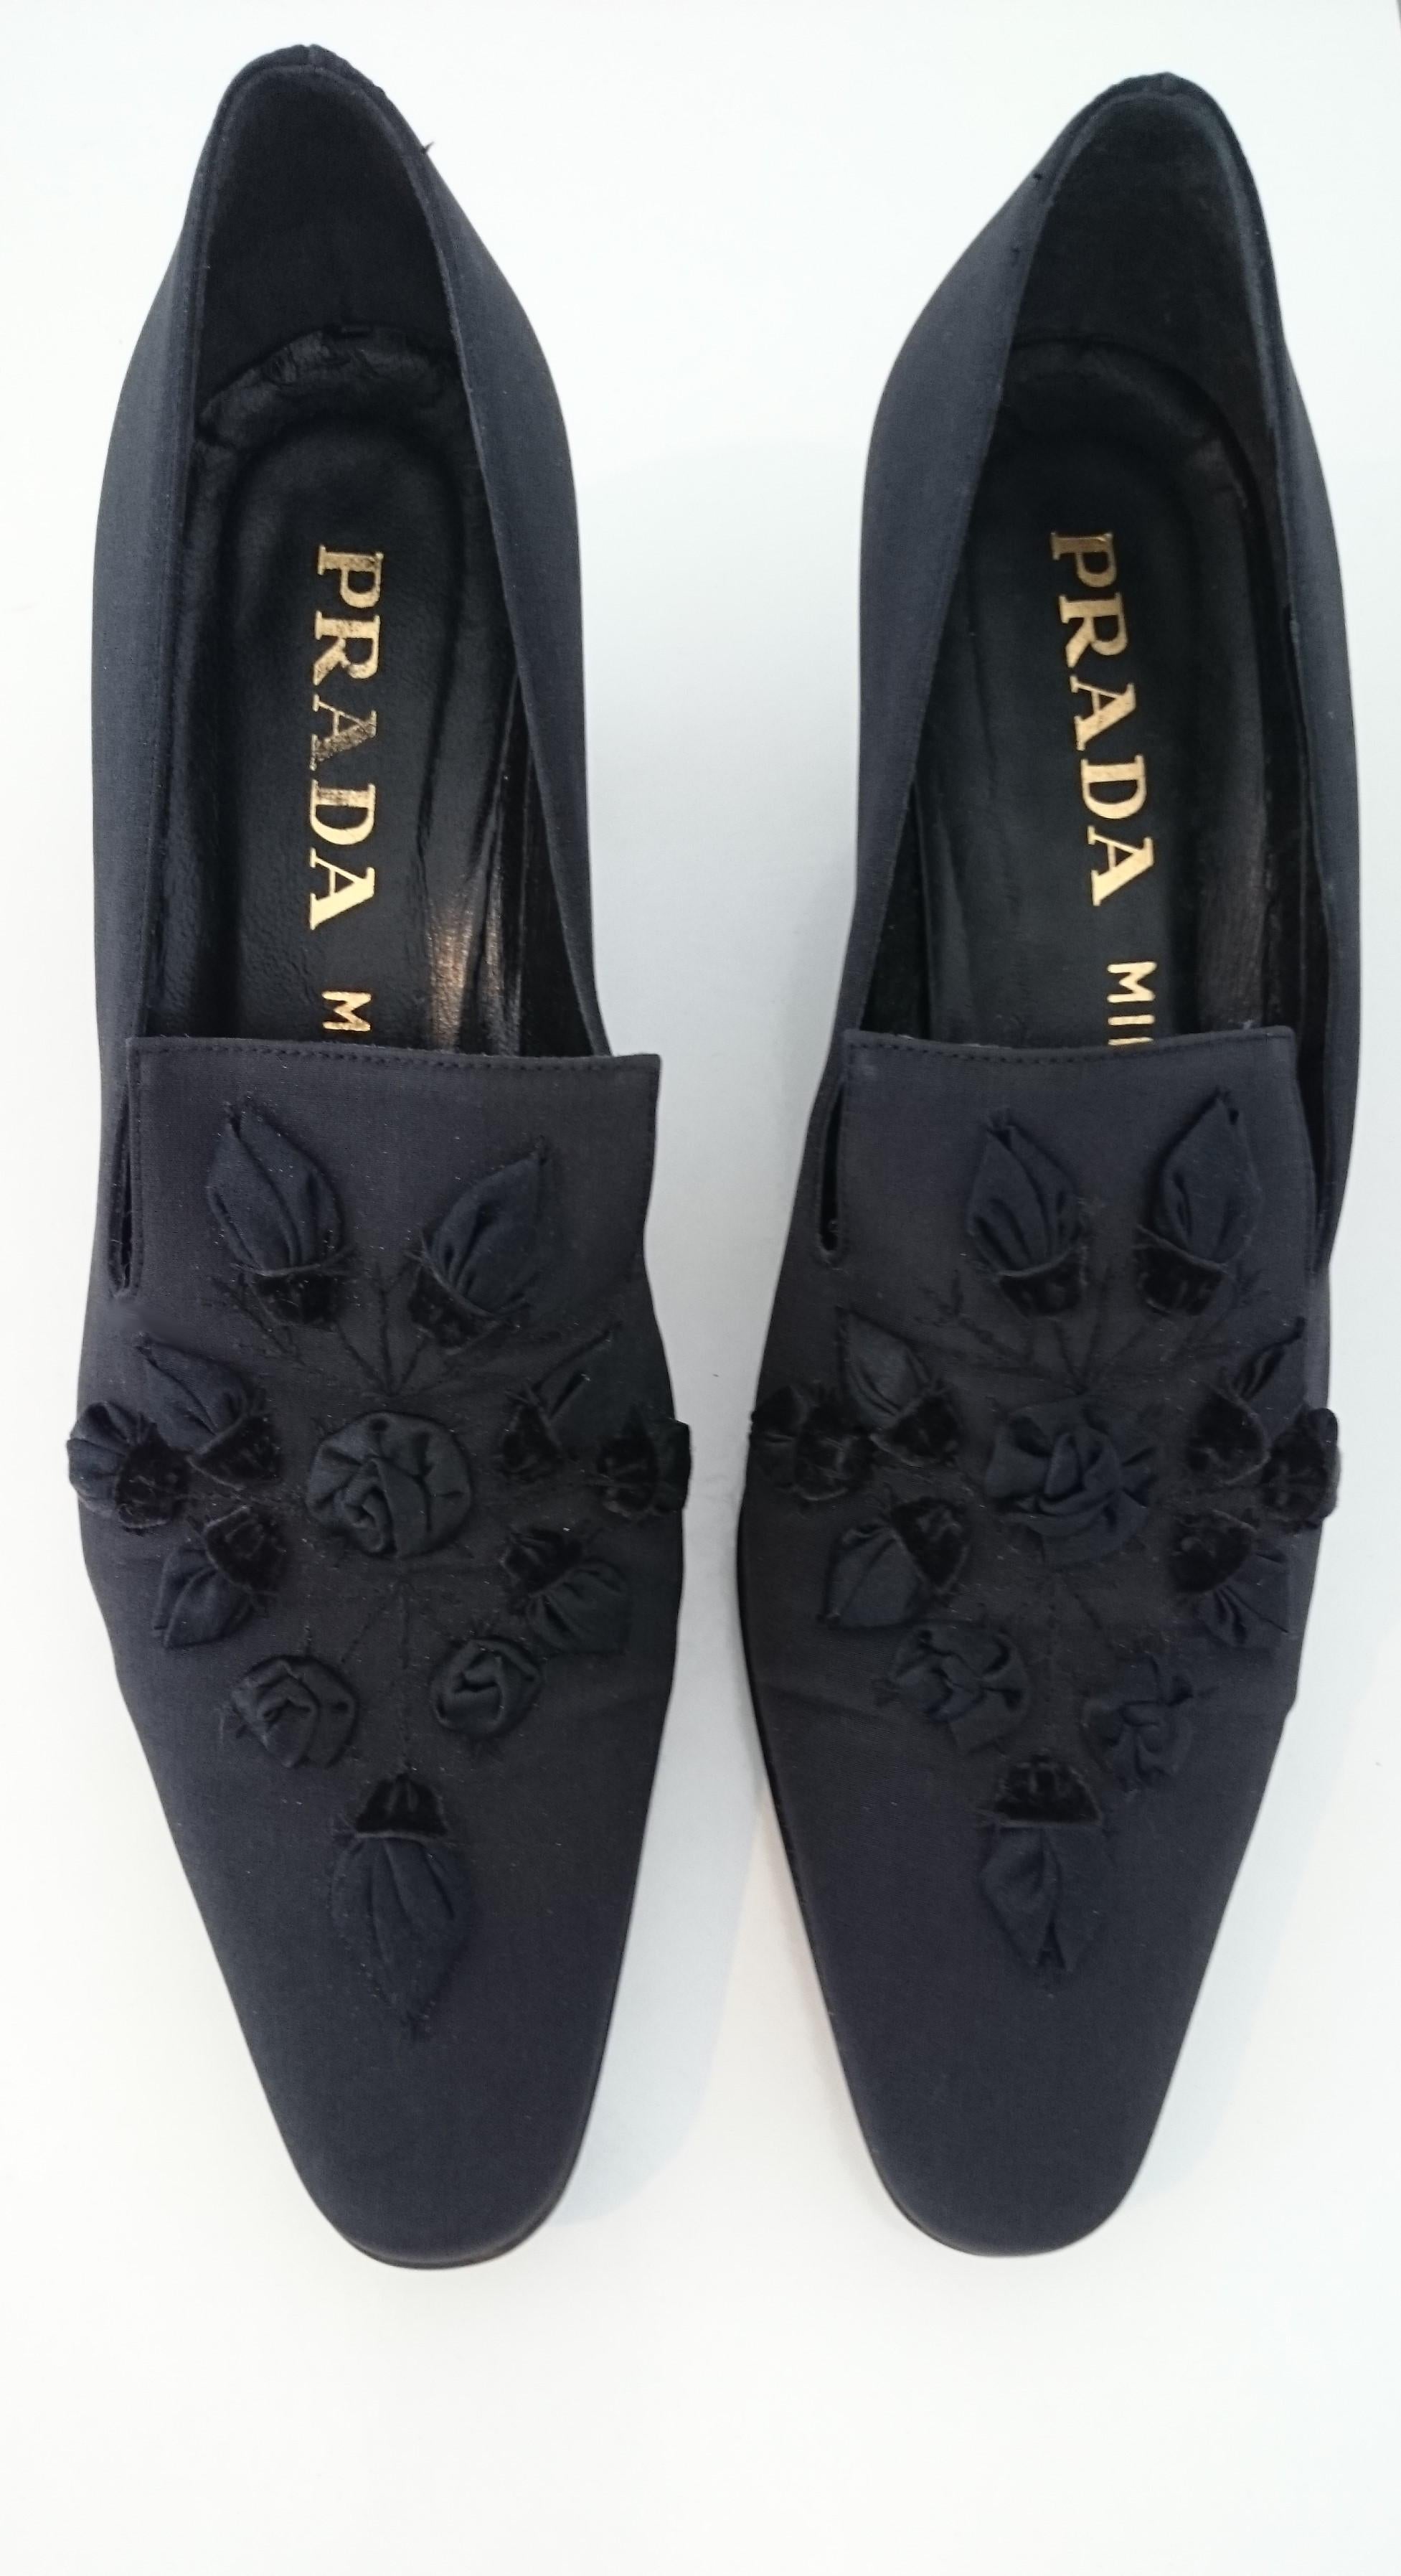 Women's Prada Black Silk Heels with Petals Designed Details in the front. Size 39 1/2 For Sale